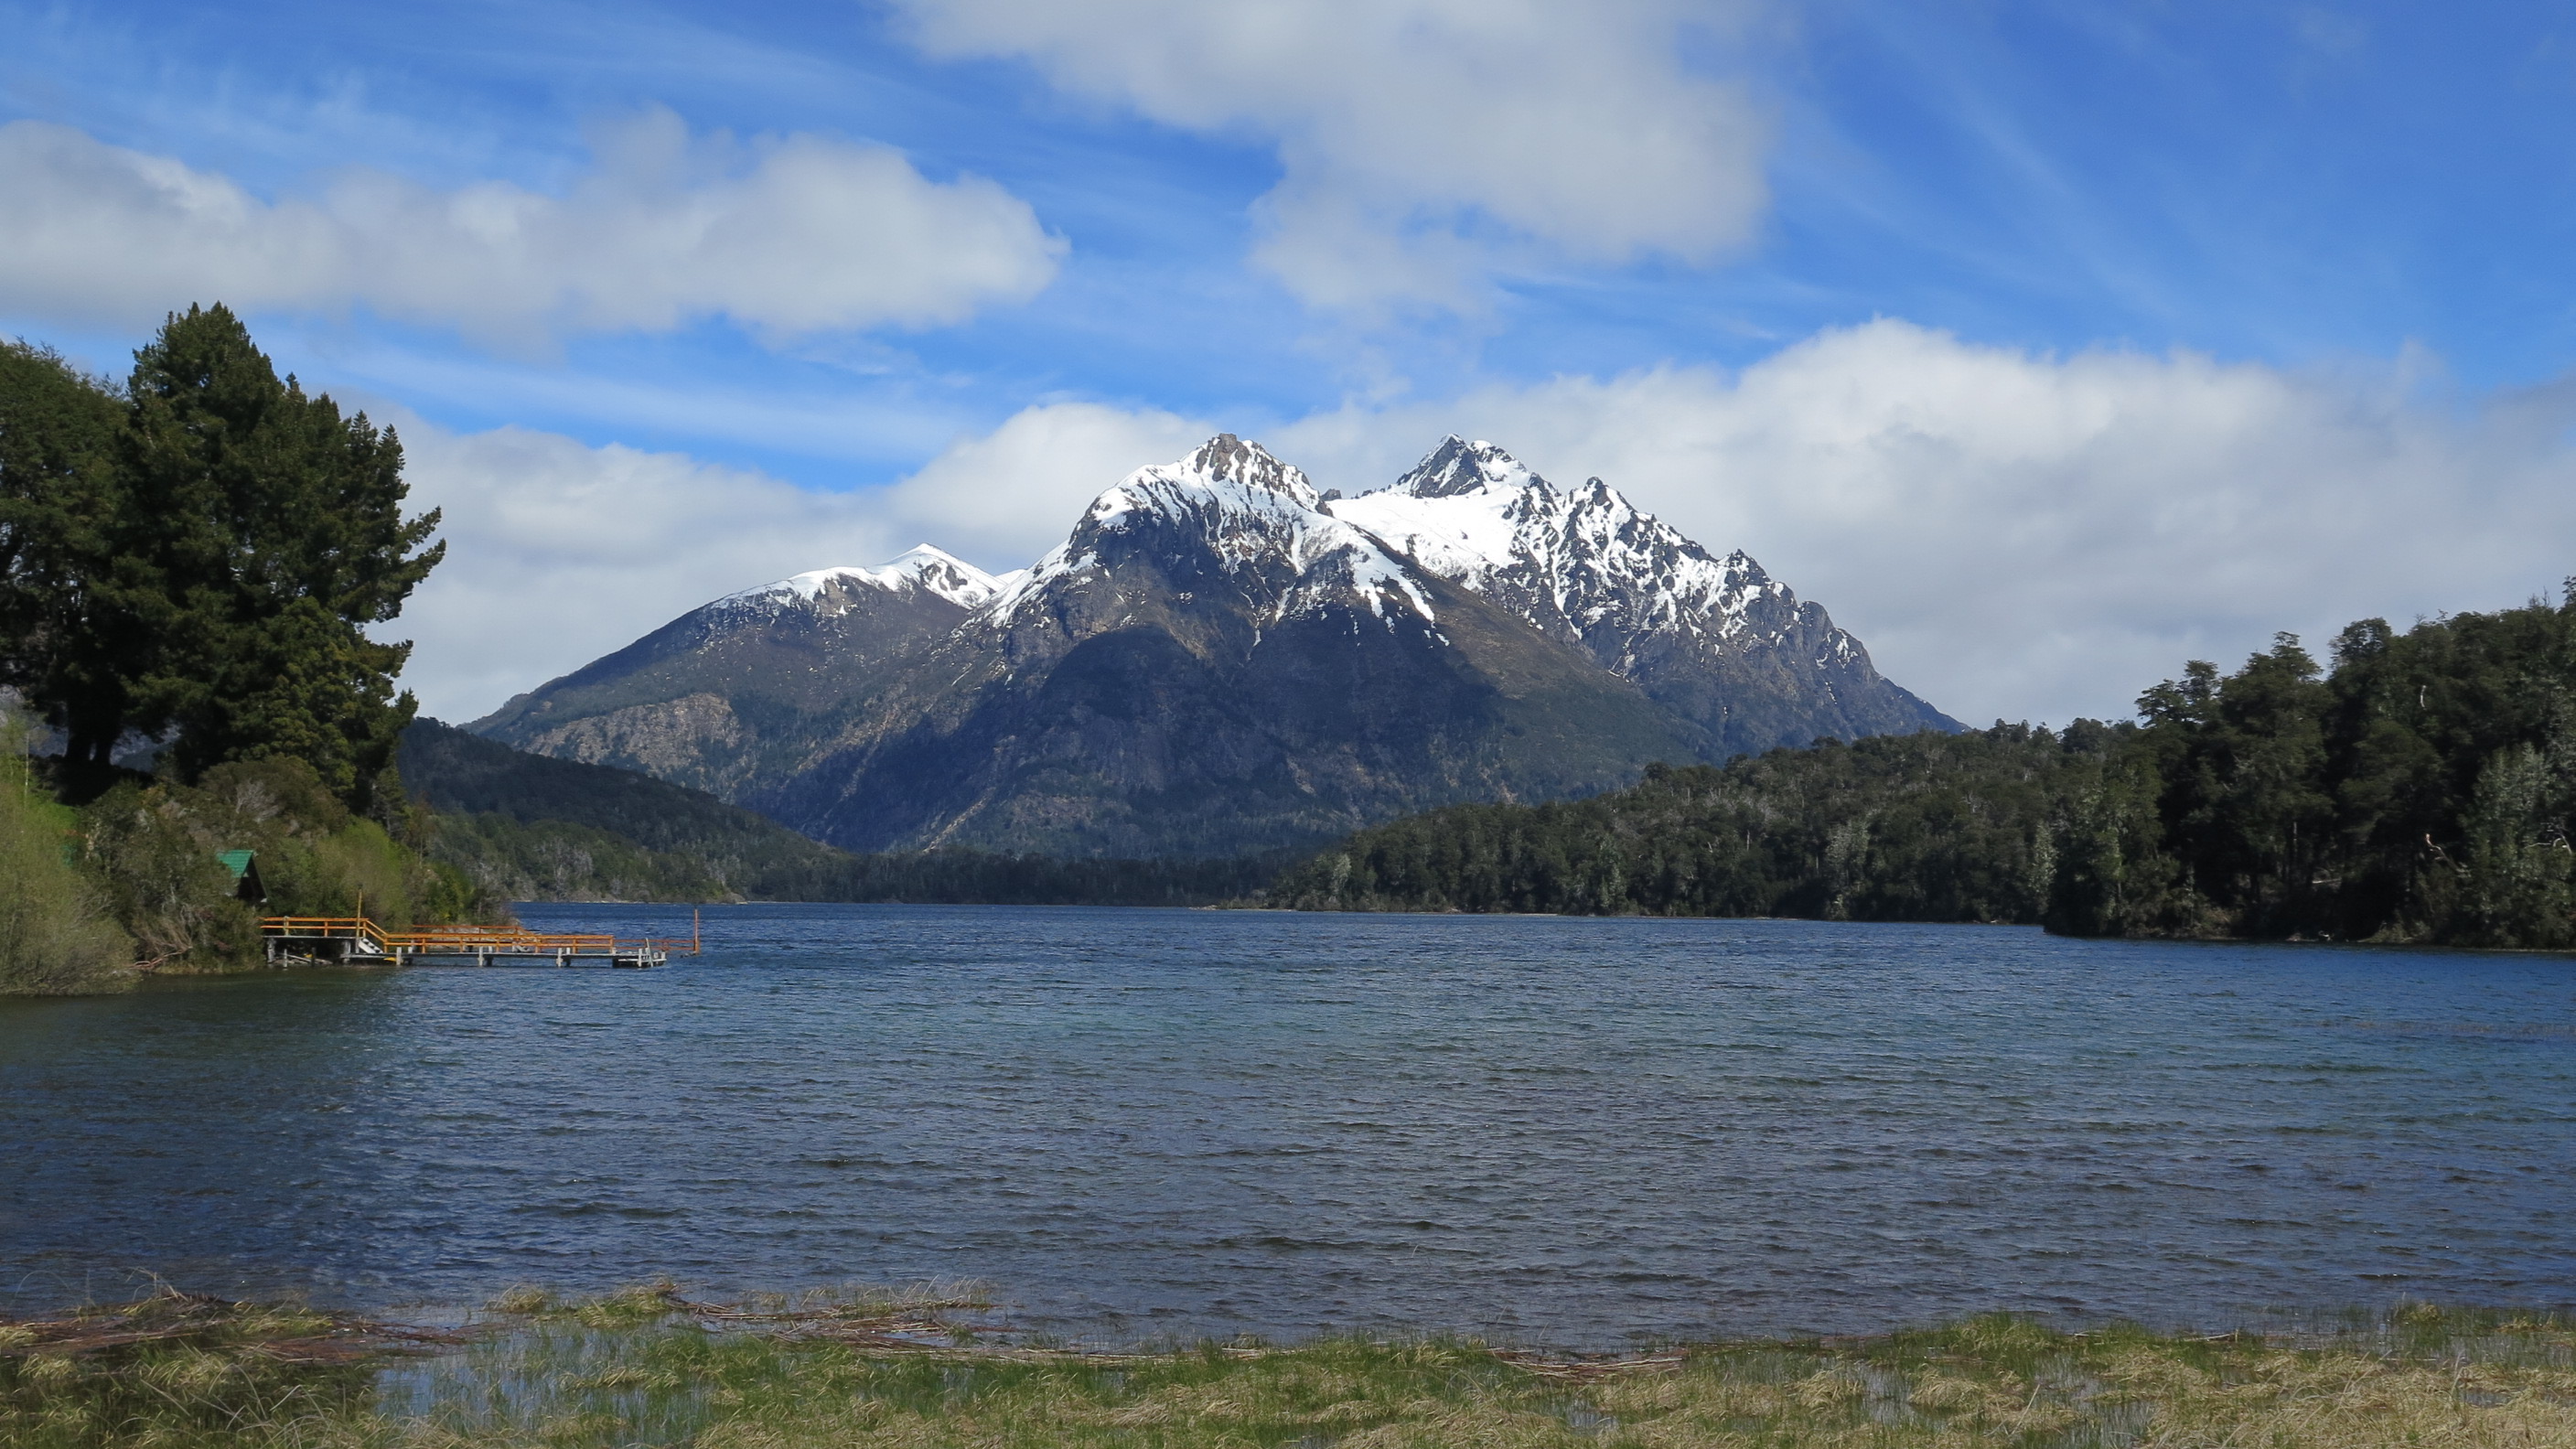 Northern Patagonia: Come for the Scenery, Stay for the People